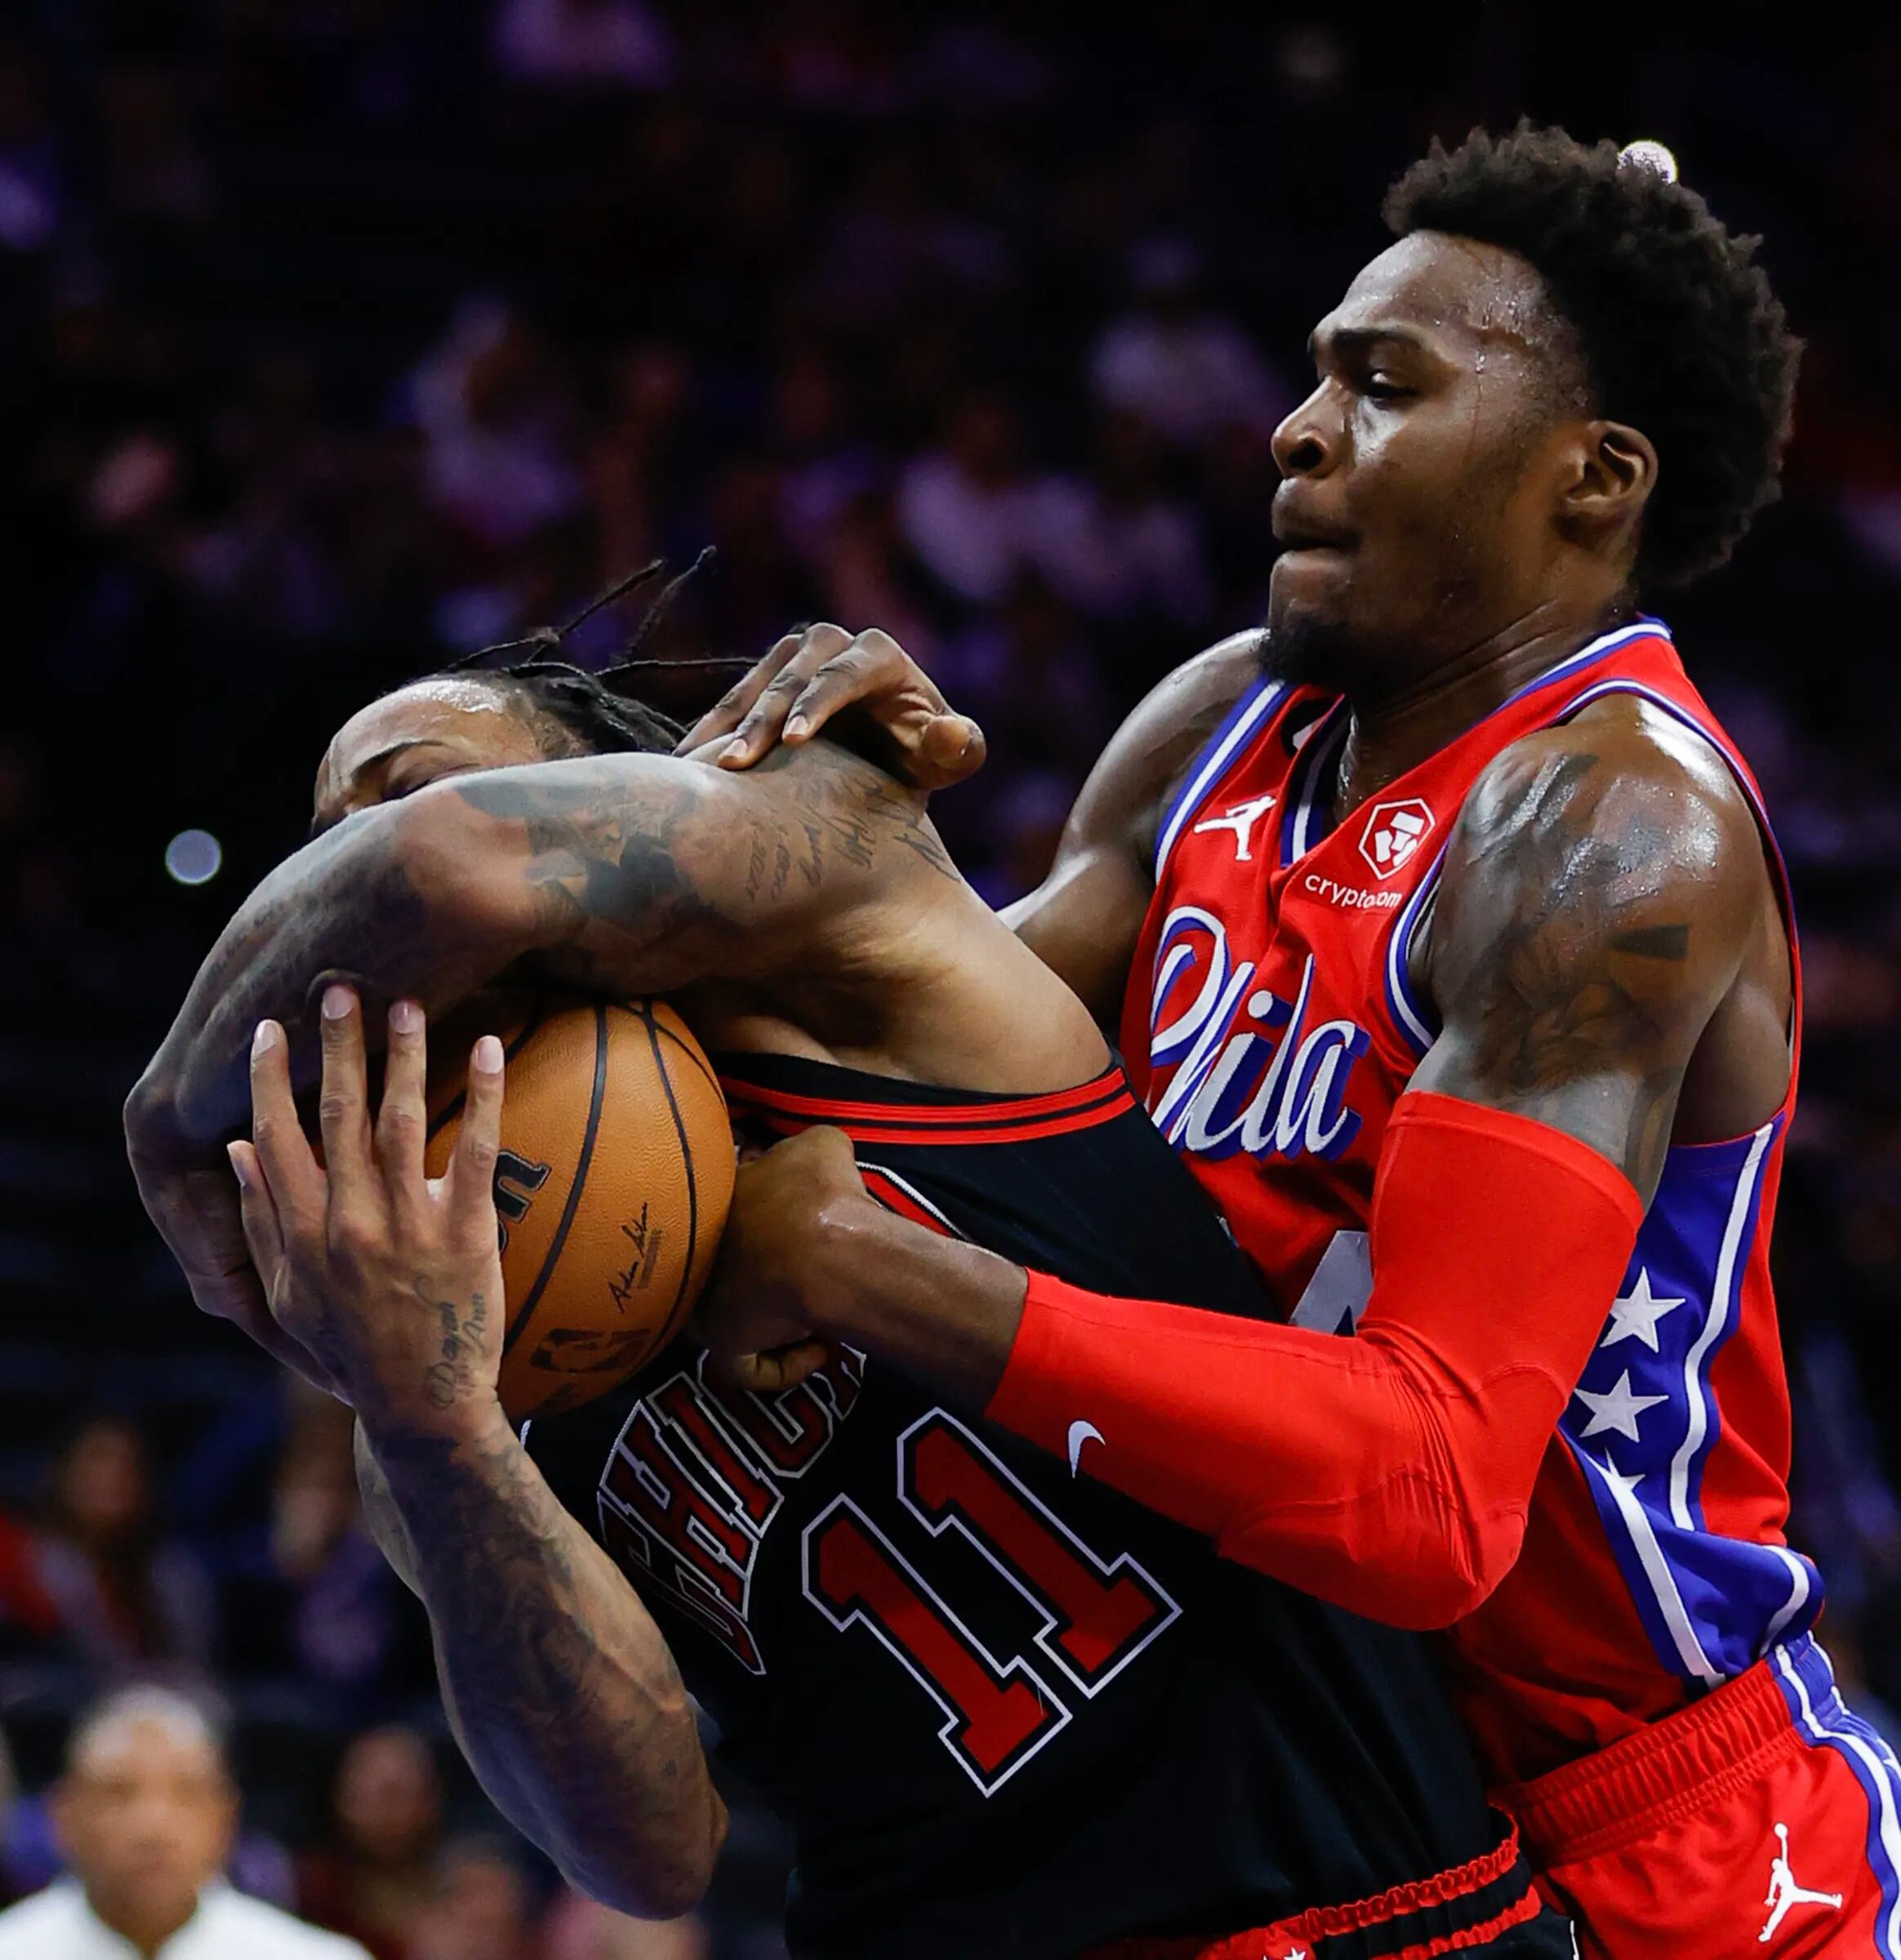 Photos from the Sixers losing to the Bulls